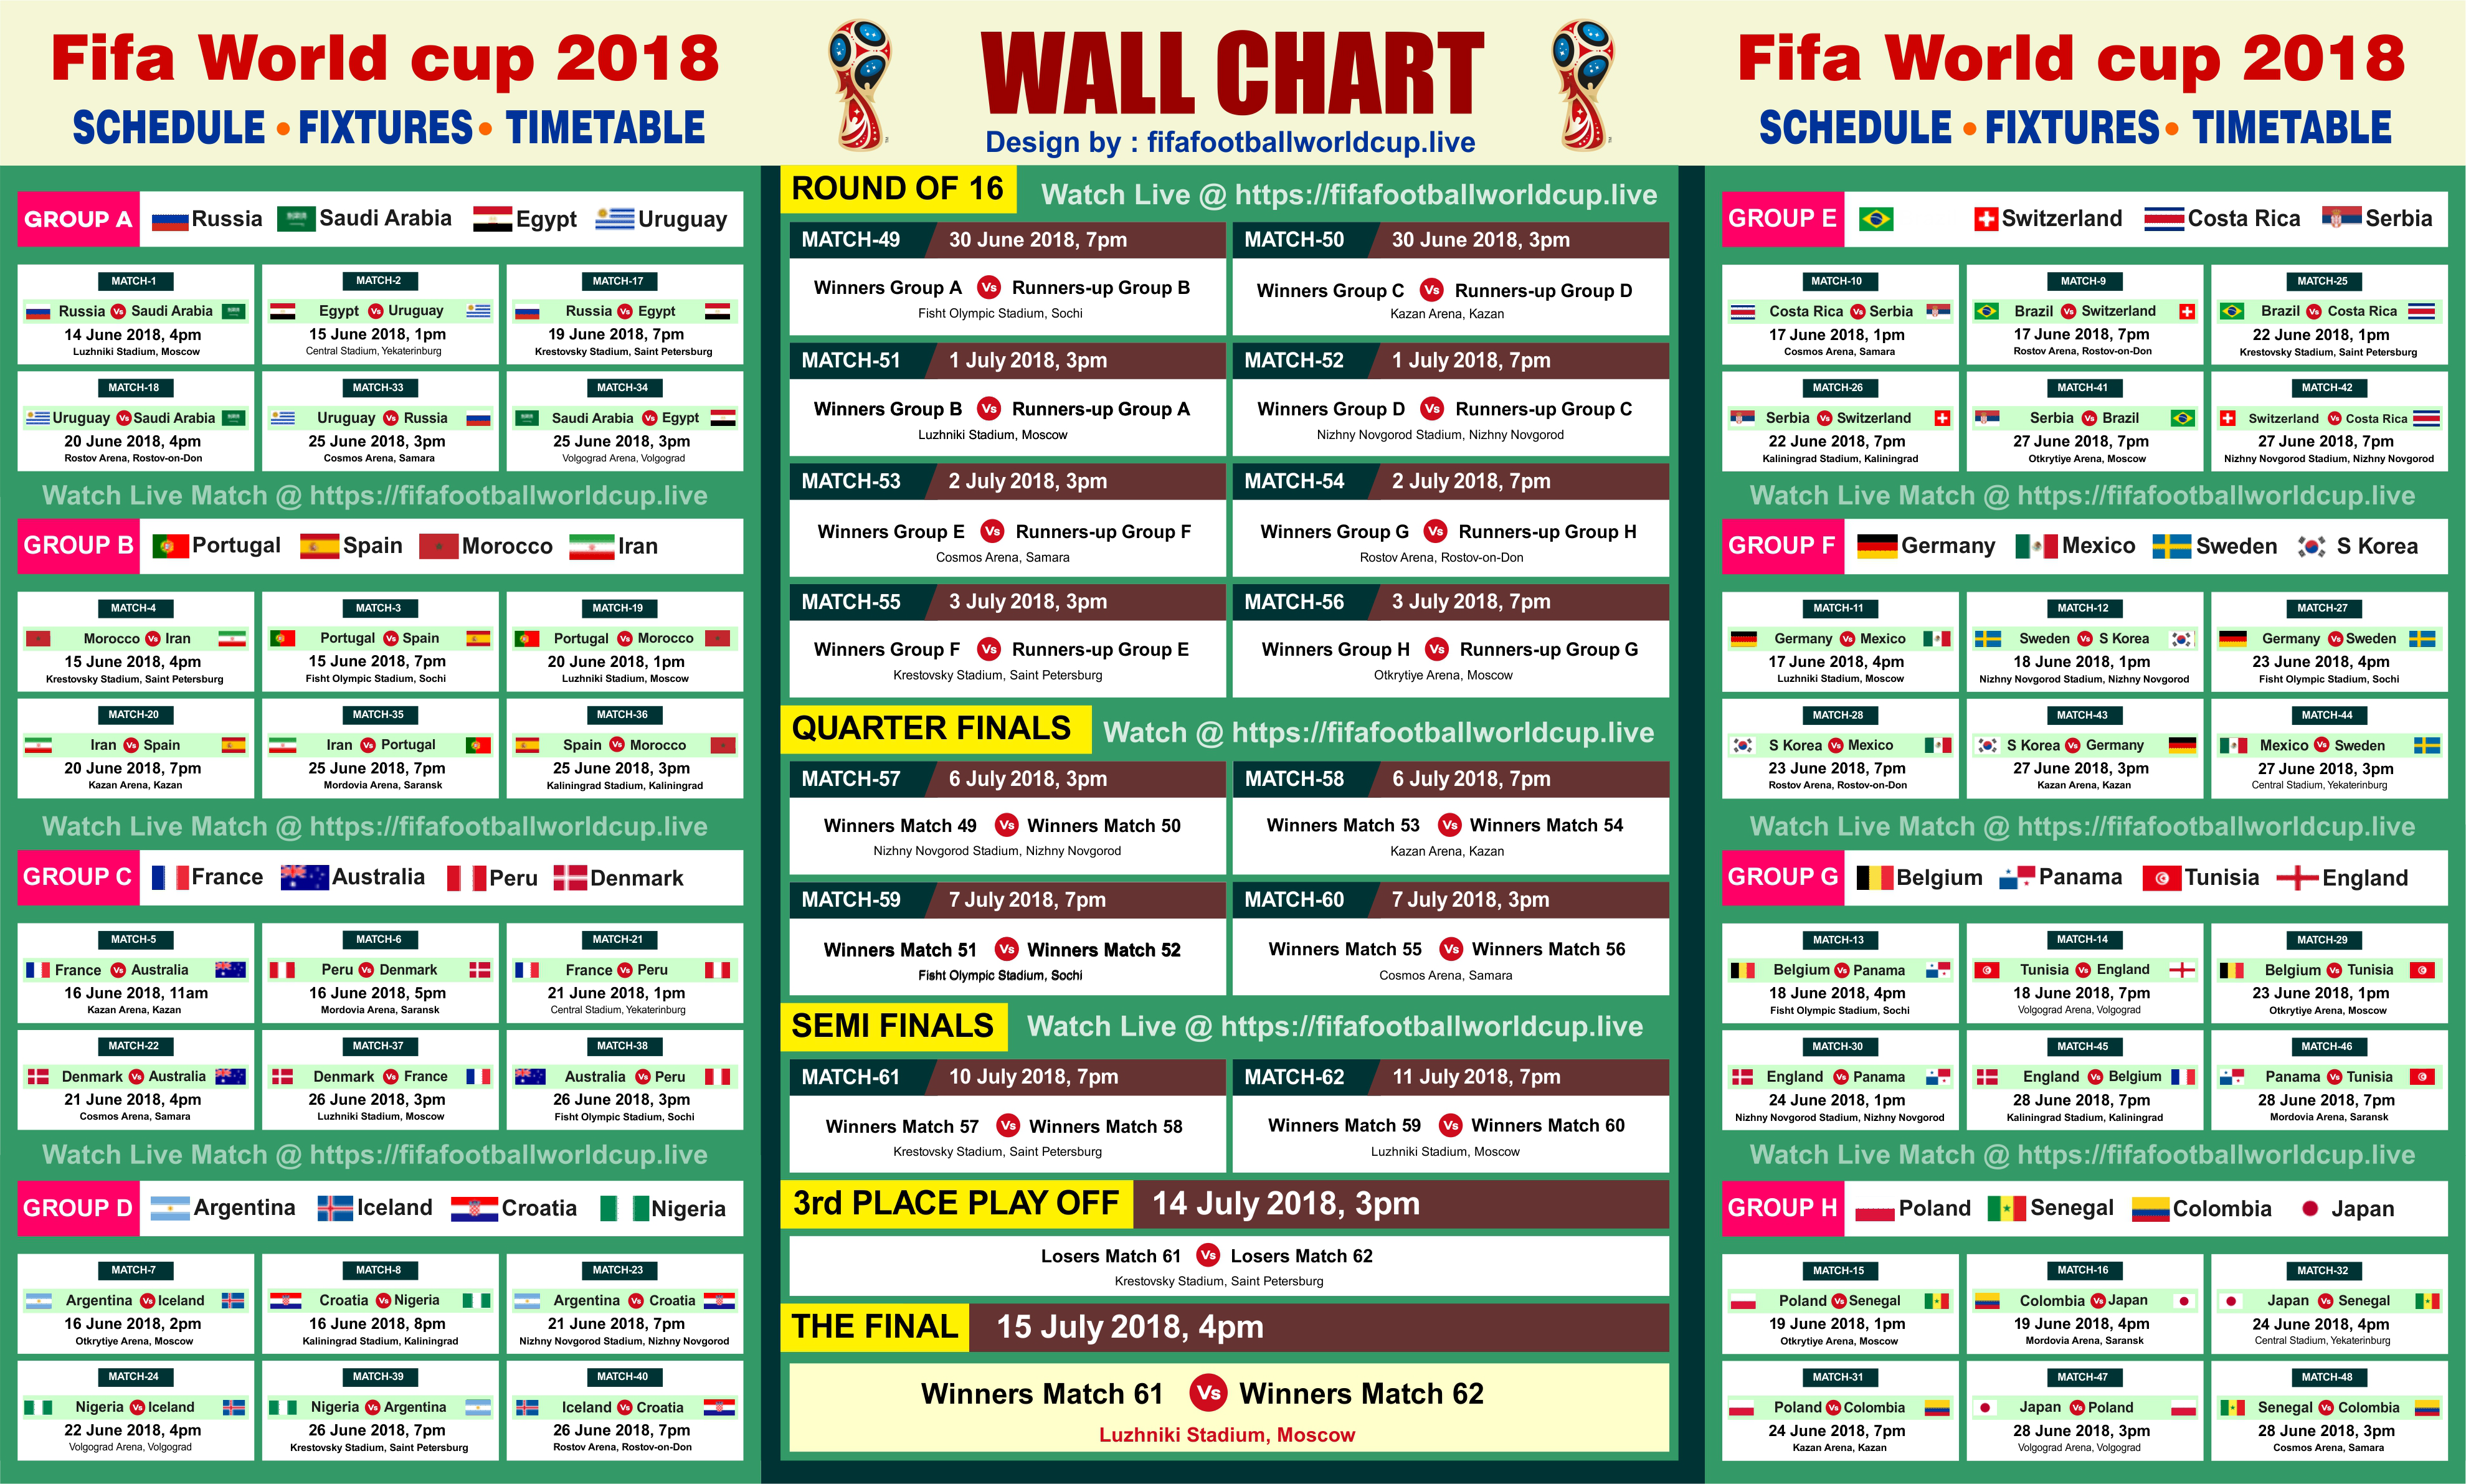 Printable Fifa World cup 2018 Schedule in Eye Catche Design